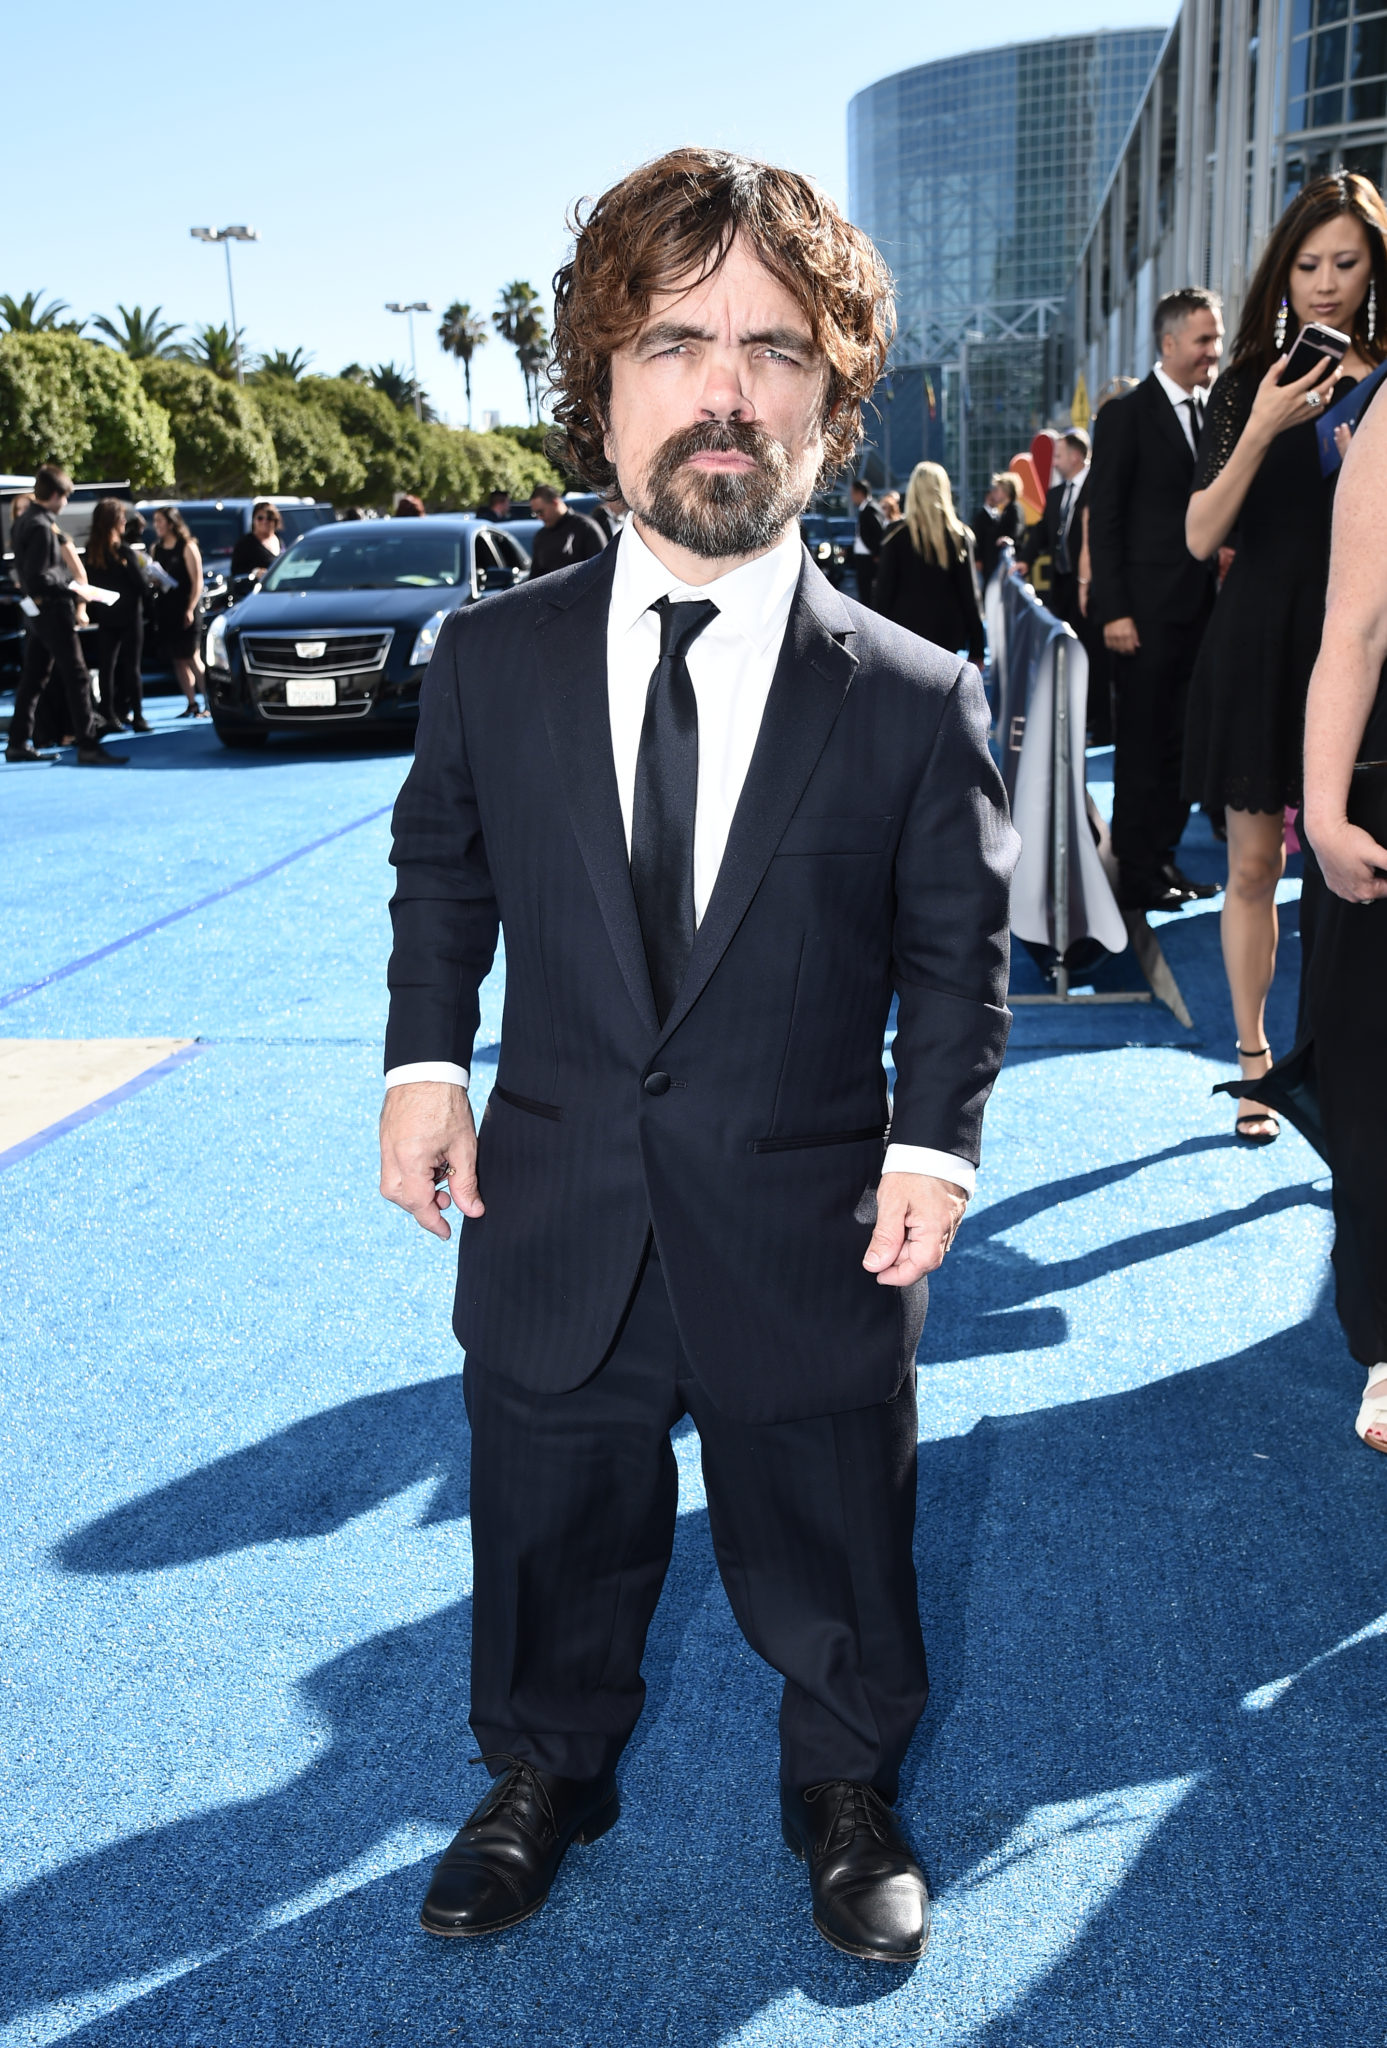 Peter Dinklage Emmys 4Chion Lifestyle